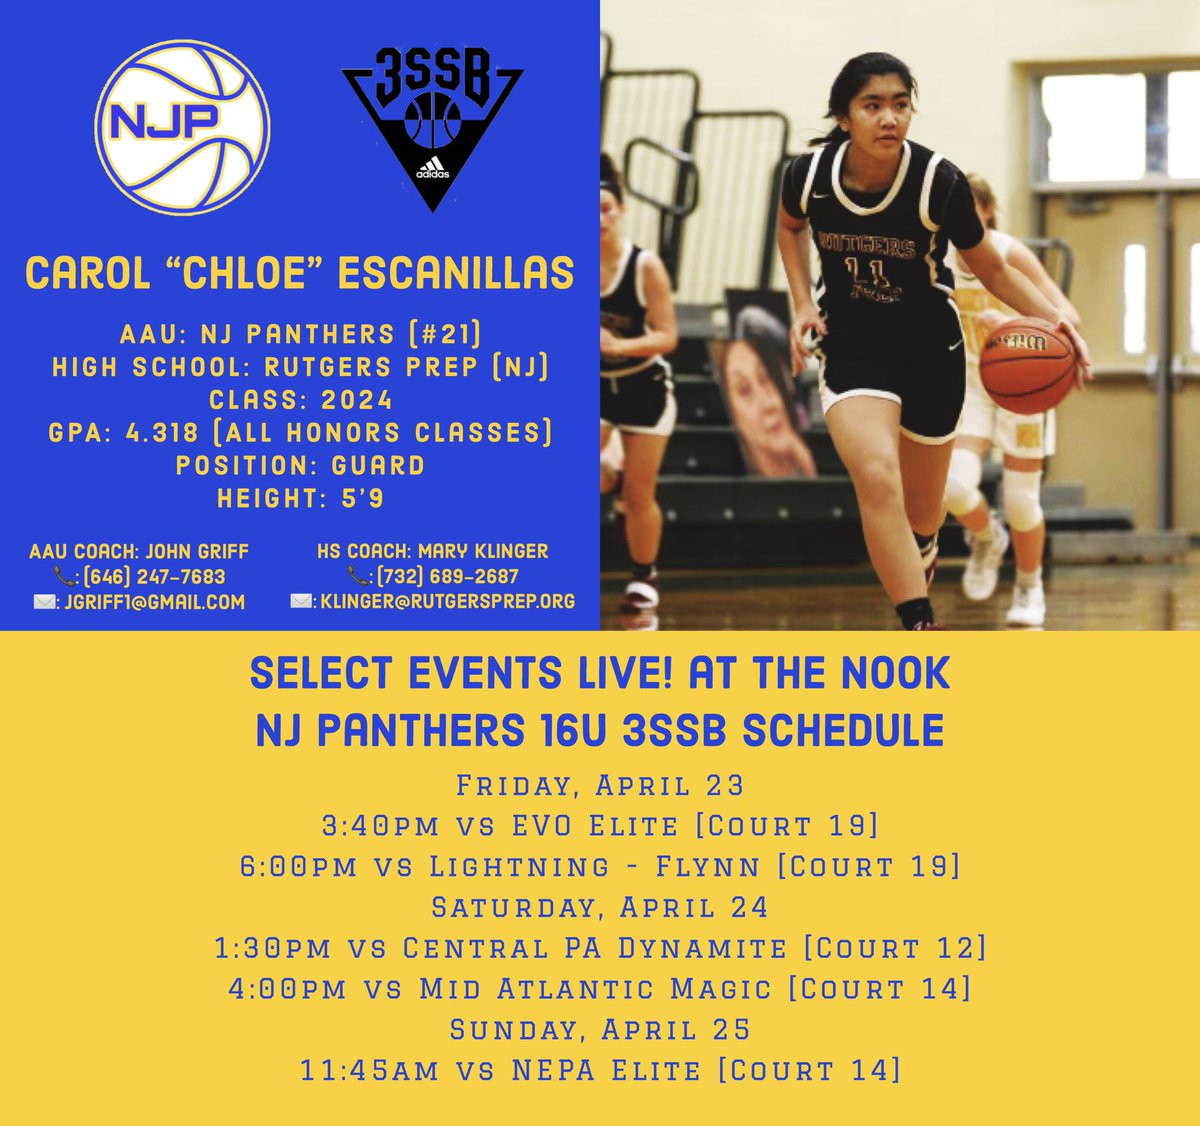 So excited for this weekend’s @SelectEventsBB tournament @NookBasketball ! Come check us out!! #ThePantherWay 🏀💙💛

@nj_panthers @Maryklinger @RutgersPrepGBB @CoachTinyGreen @NYGHoops @TeamFOOTPRINTZ @CJSportsRadio